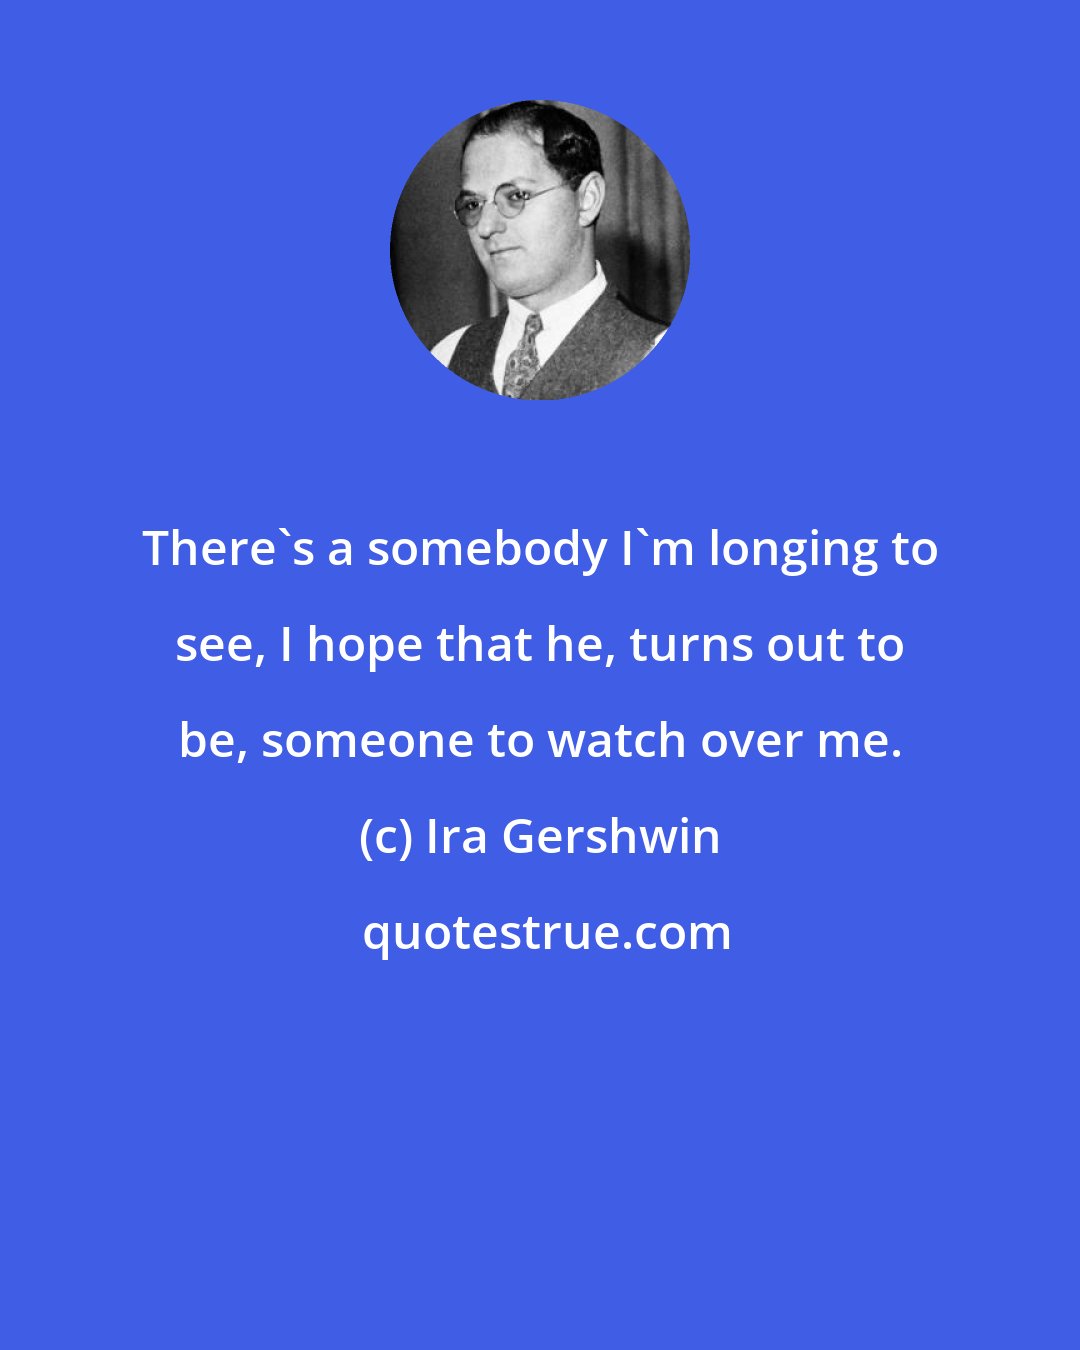 Ira Gershwin: There's a somebody I'm longing to see, I hope that he, turns out to be, someone to watch over me.